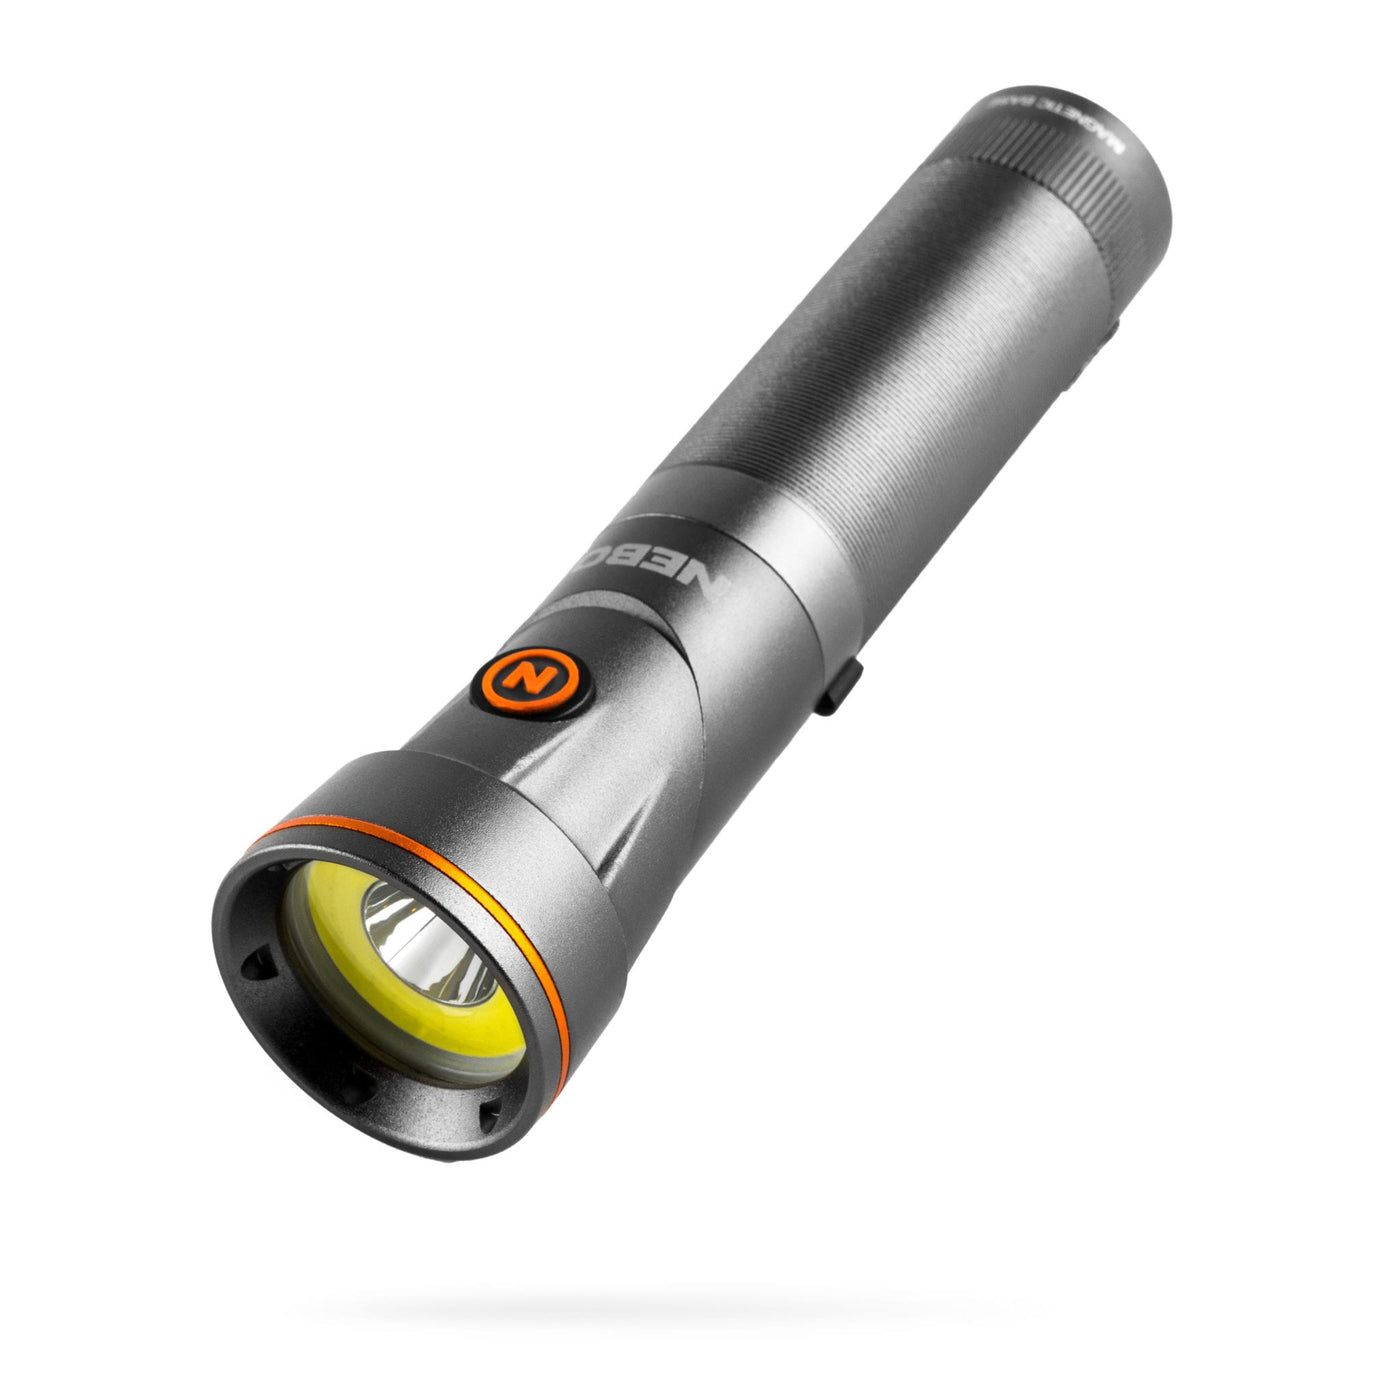 At Nebo Tools, we continually innovate so that we can offer the highest quality LED lighting products at the best price. The Franklin™ Pivot by NEBO features a high-powered 300 lumen COB LED flashlight and COB LED work light, 90° pivoting head, and a powerful magnetic base. The included battery allows for up to 30 hours of operation in between charges.